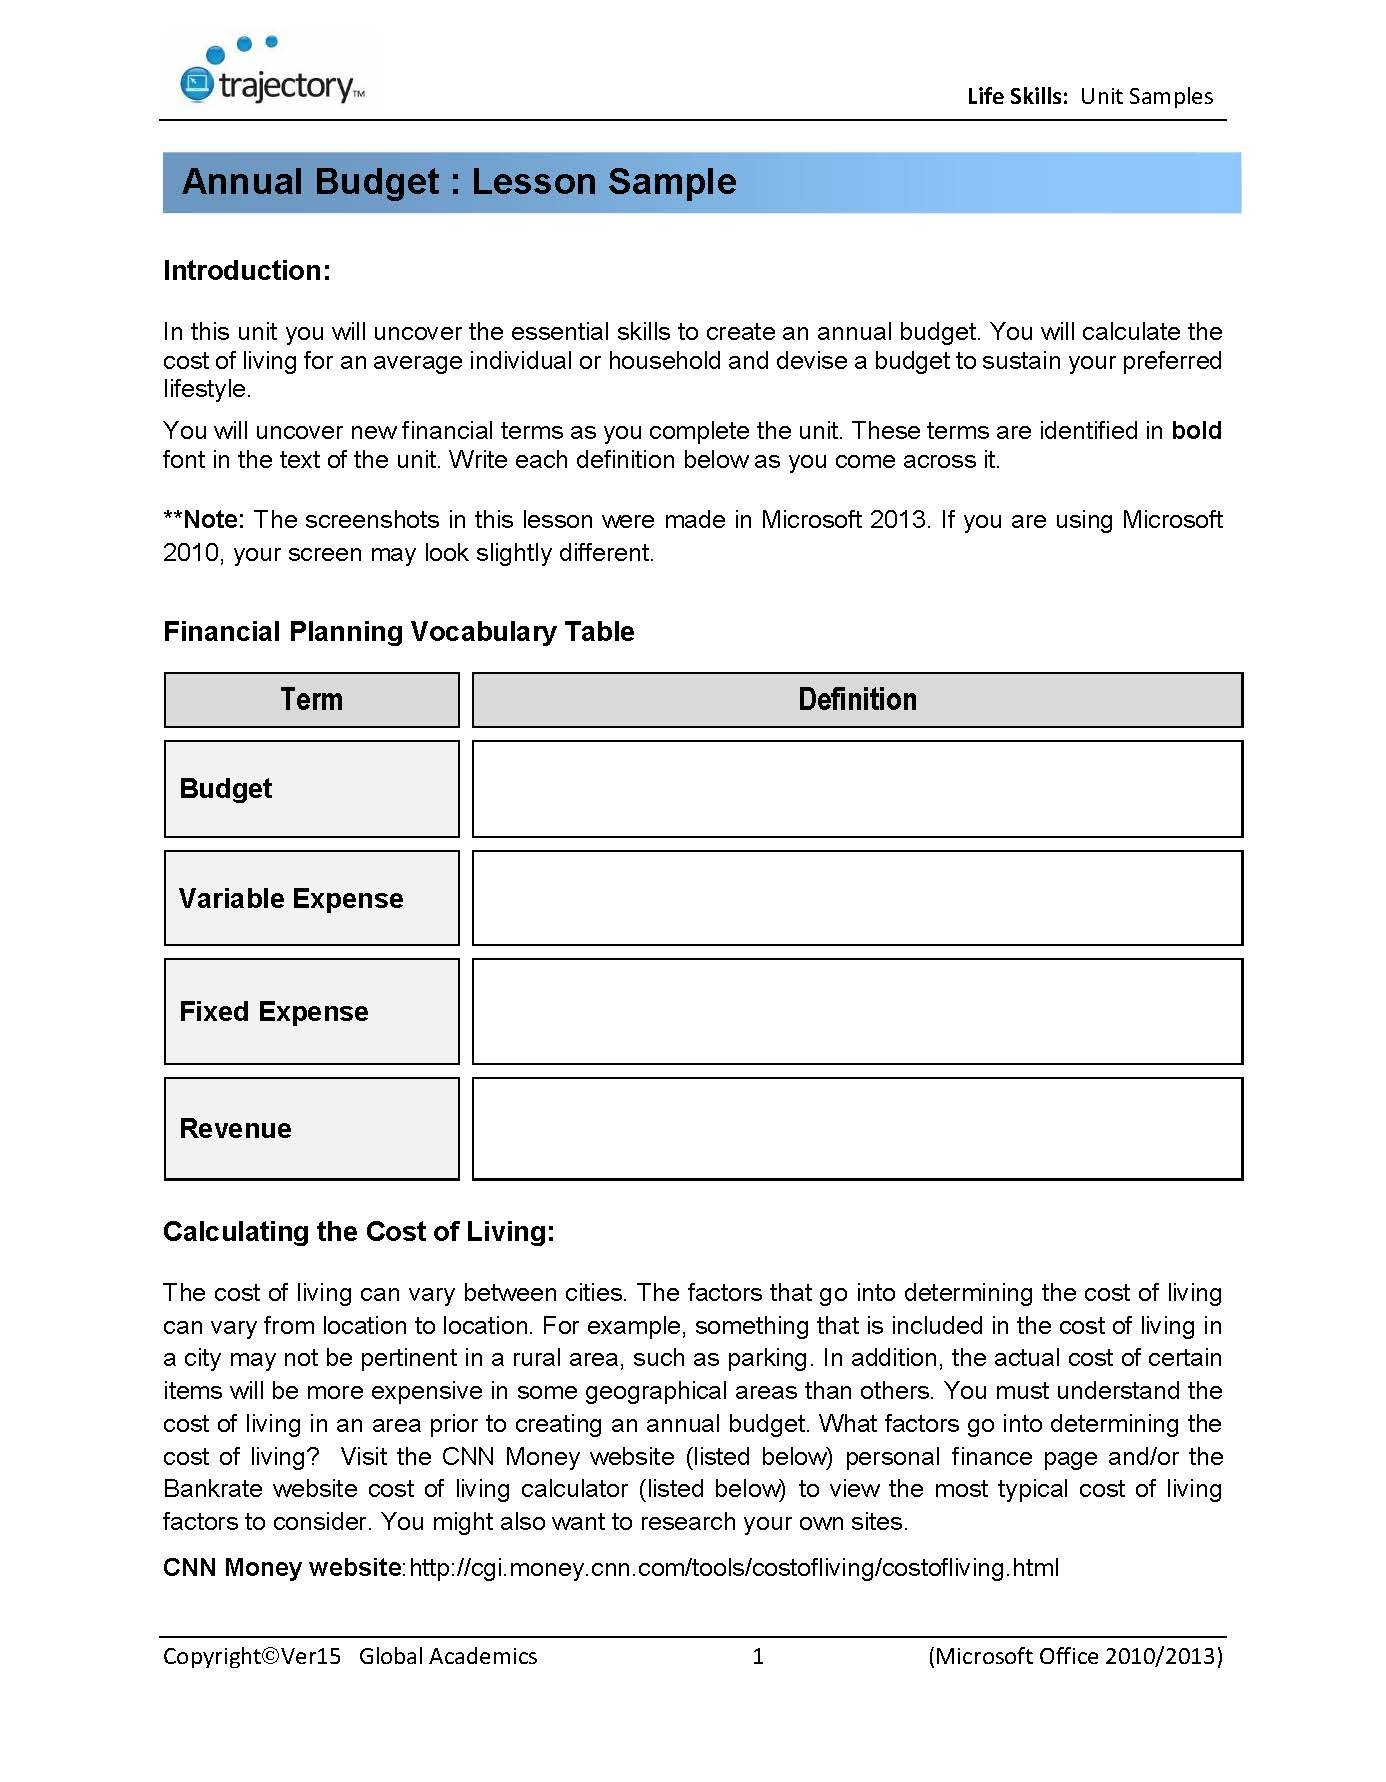 Trajectory Teachers The Curriculum Of Computer Technology For K8 Throughout Life Skills Worksheets High School